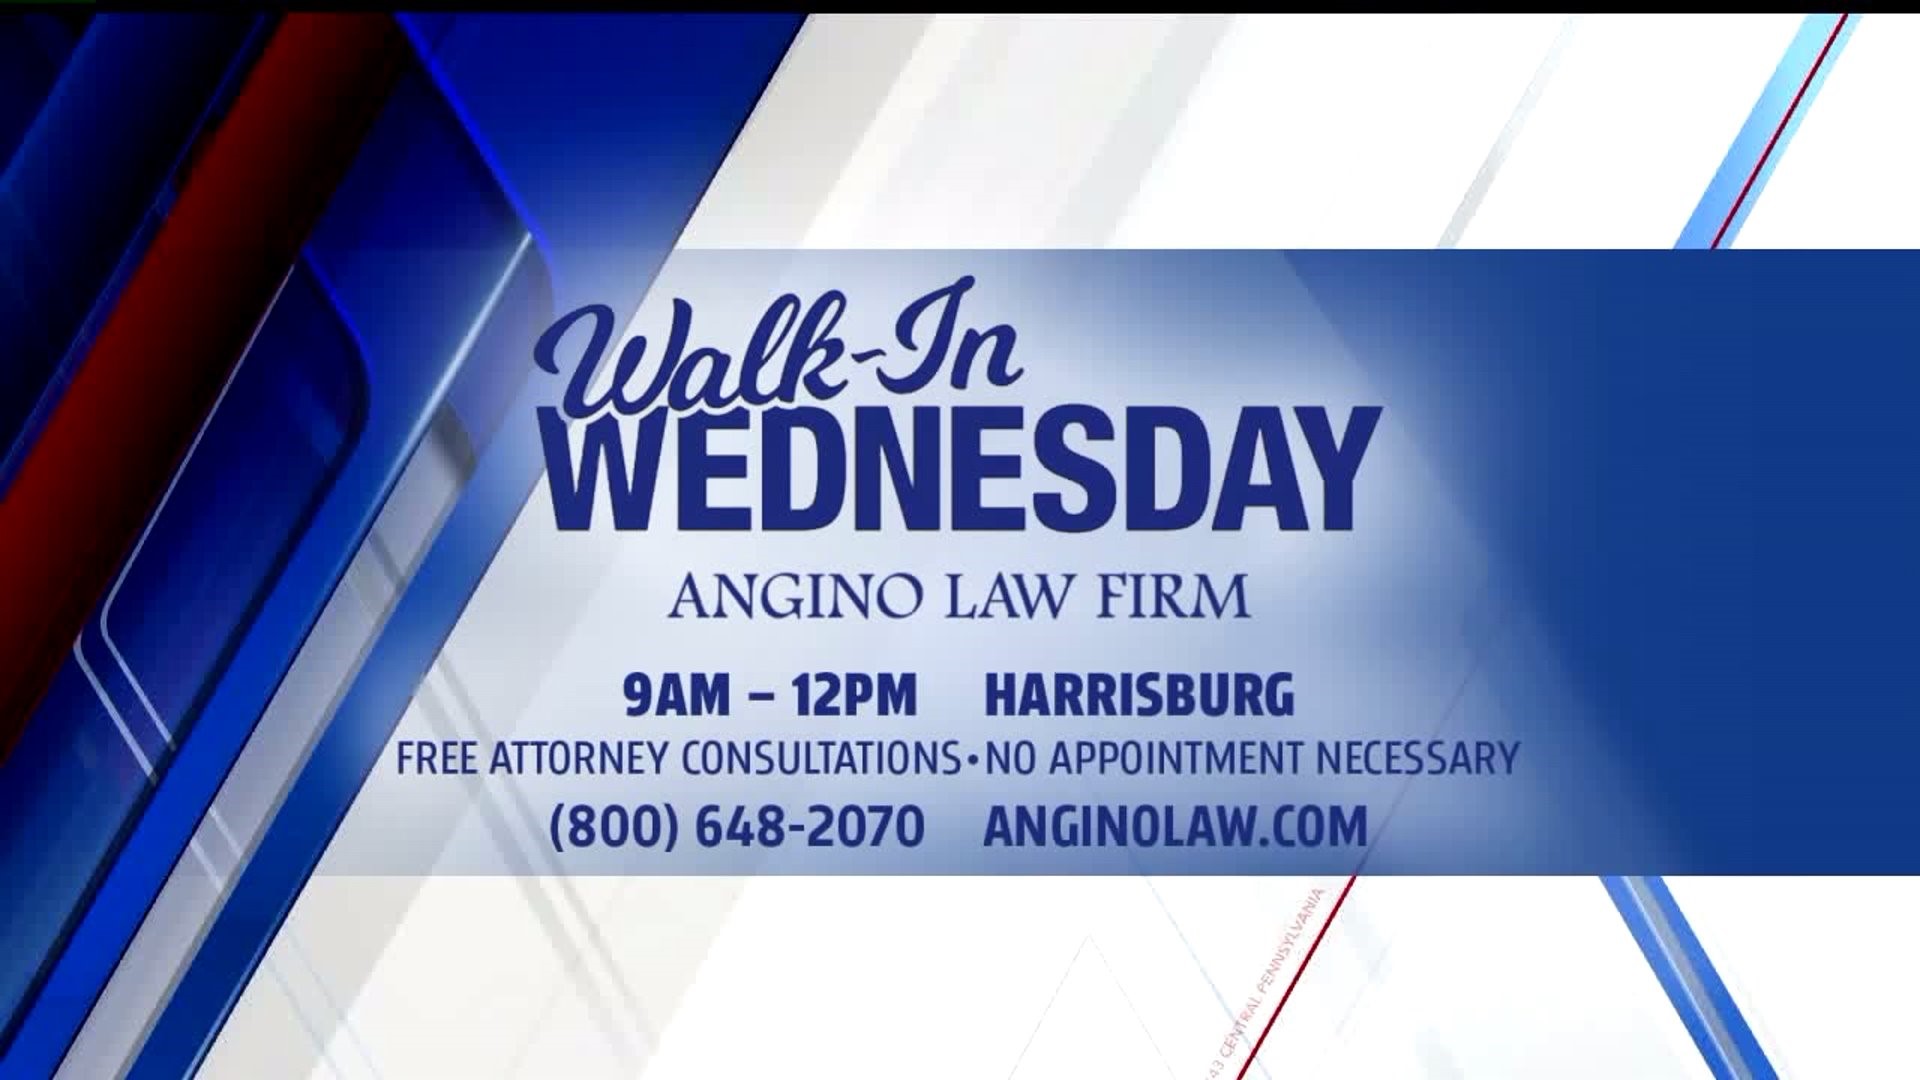 Walk-In Wednesdays provides the chance to have insurance questions answered